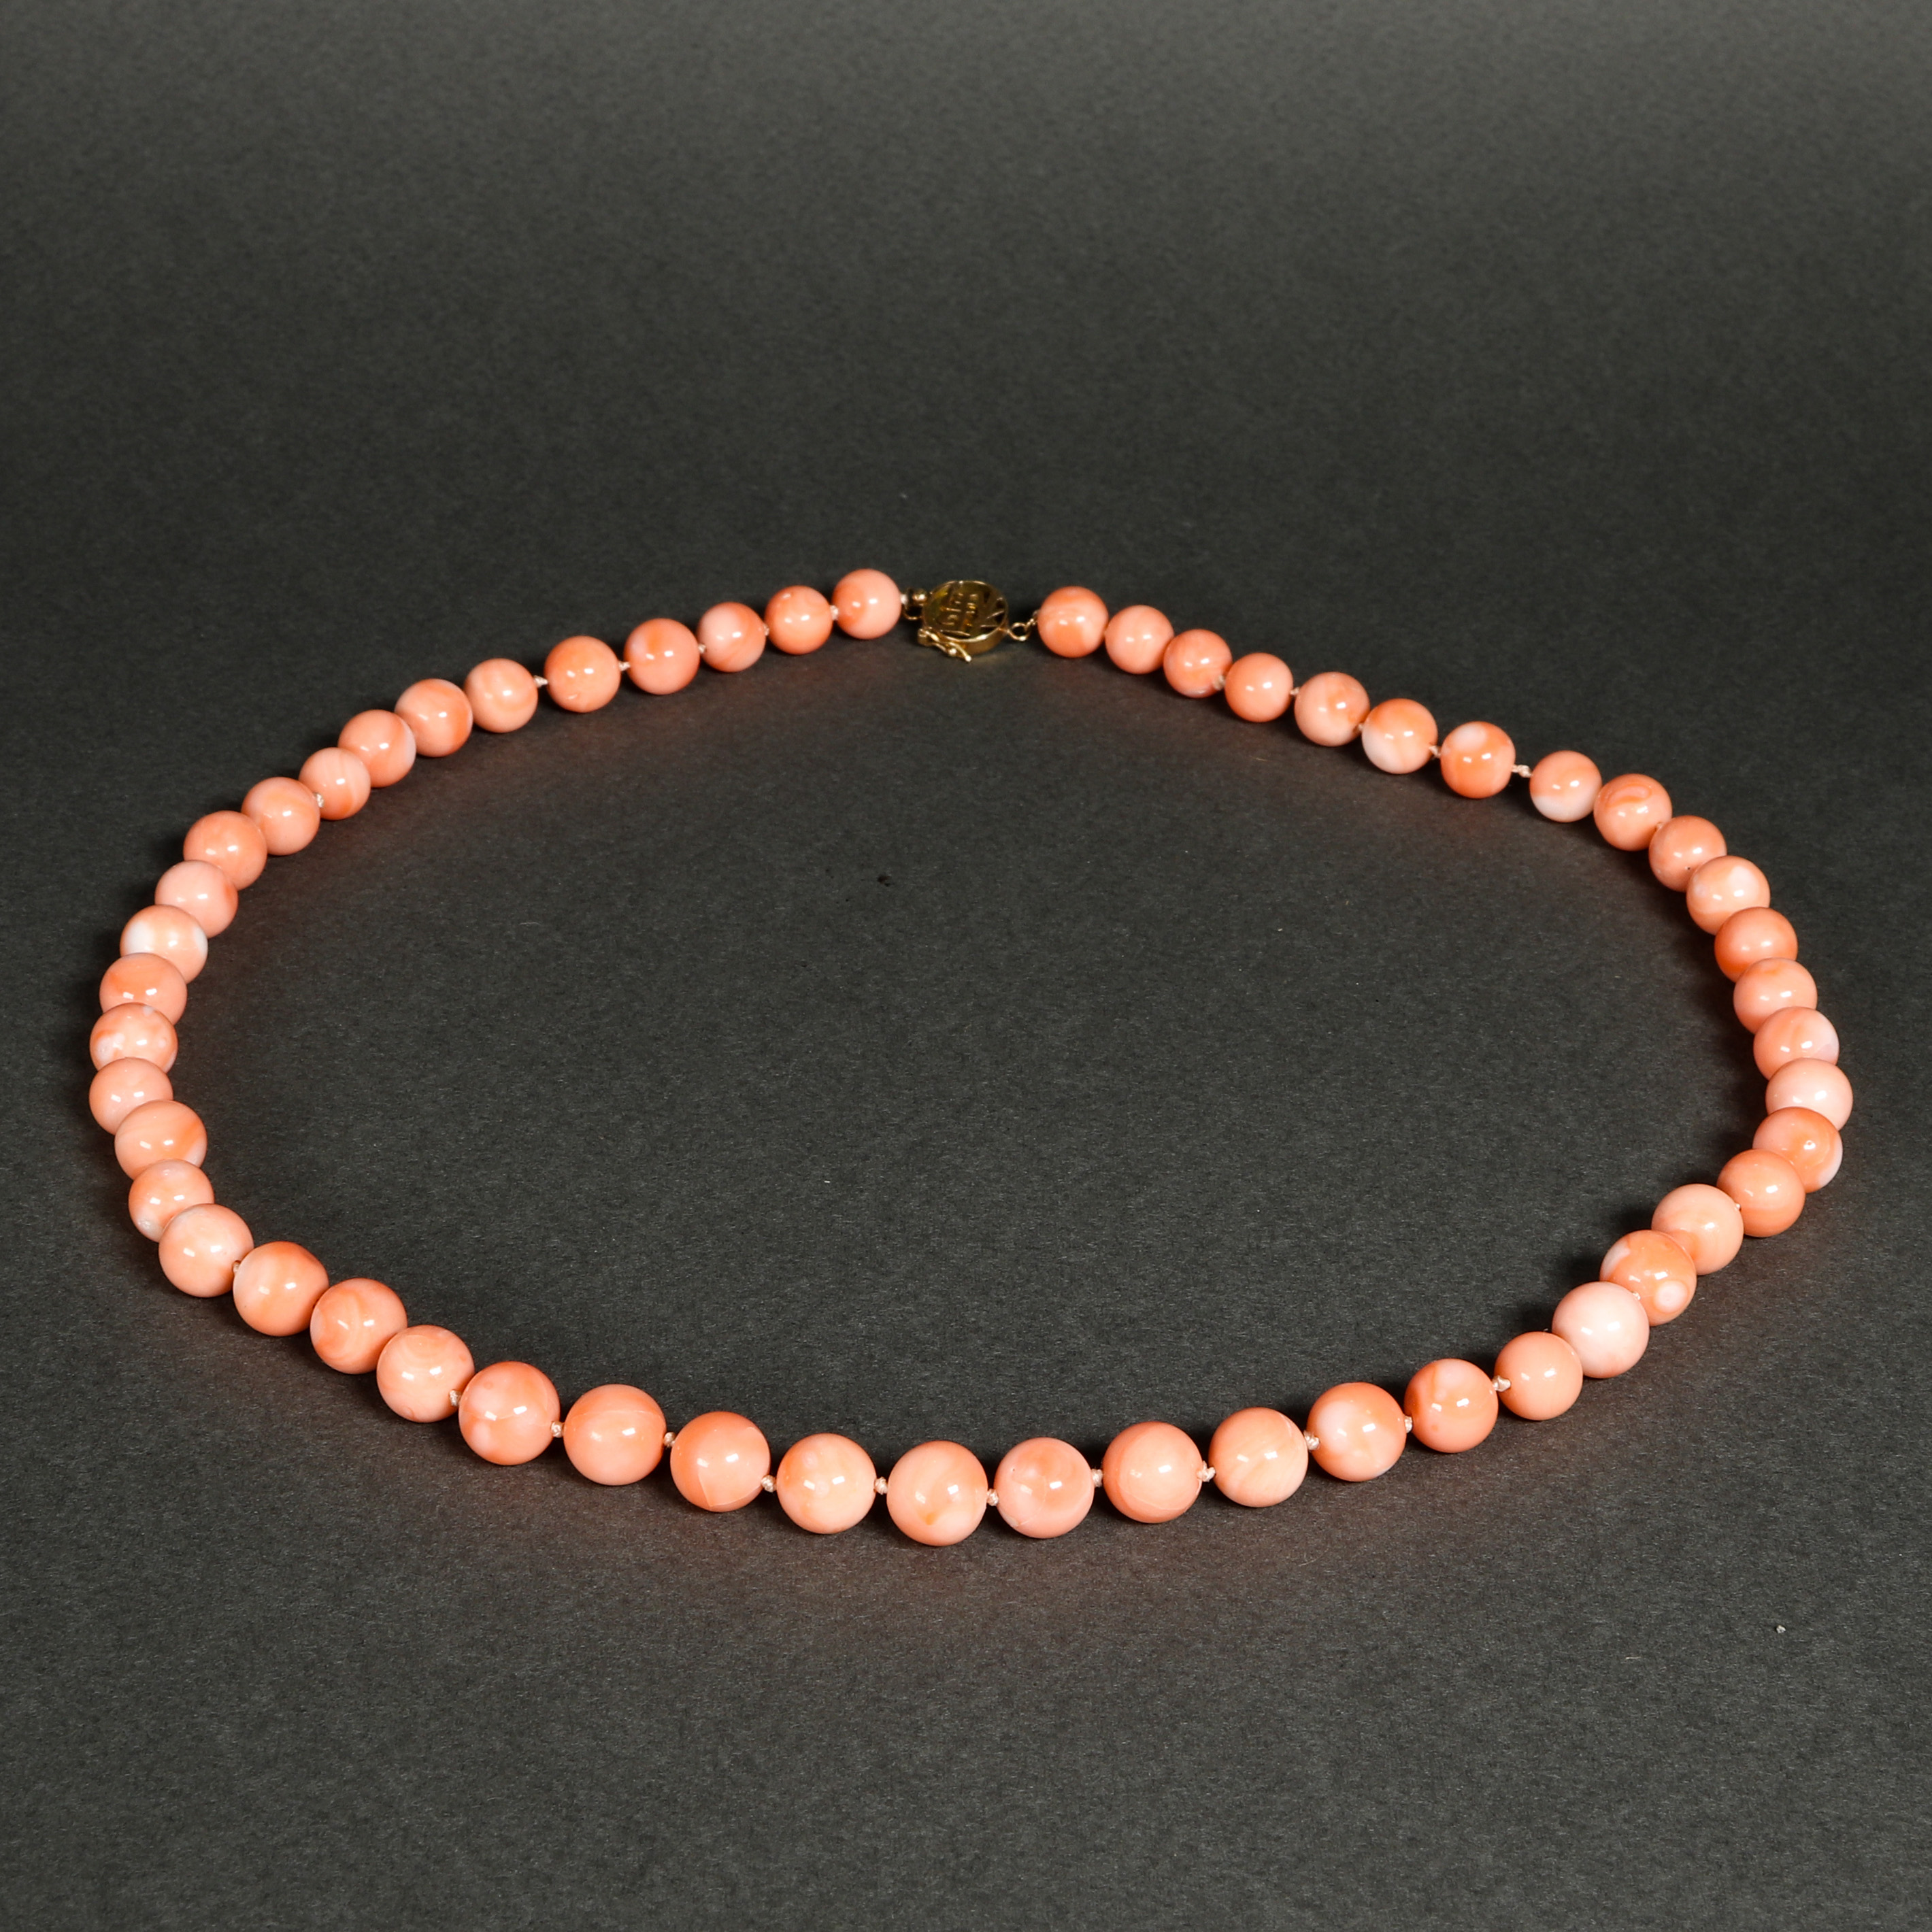 CHINESE PINK CORAL BEAD NECKLACE 3a4b1c